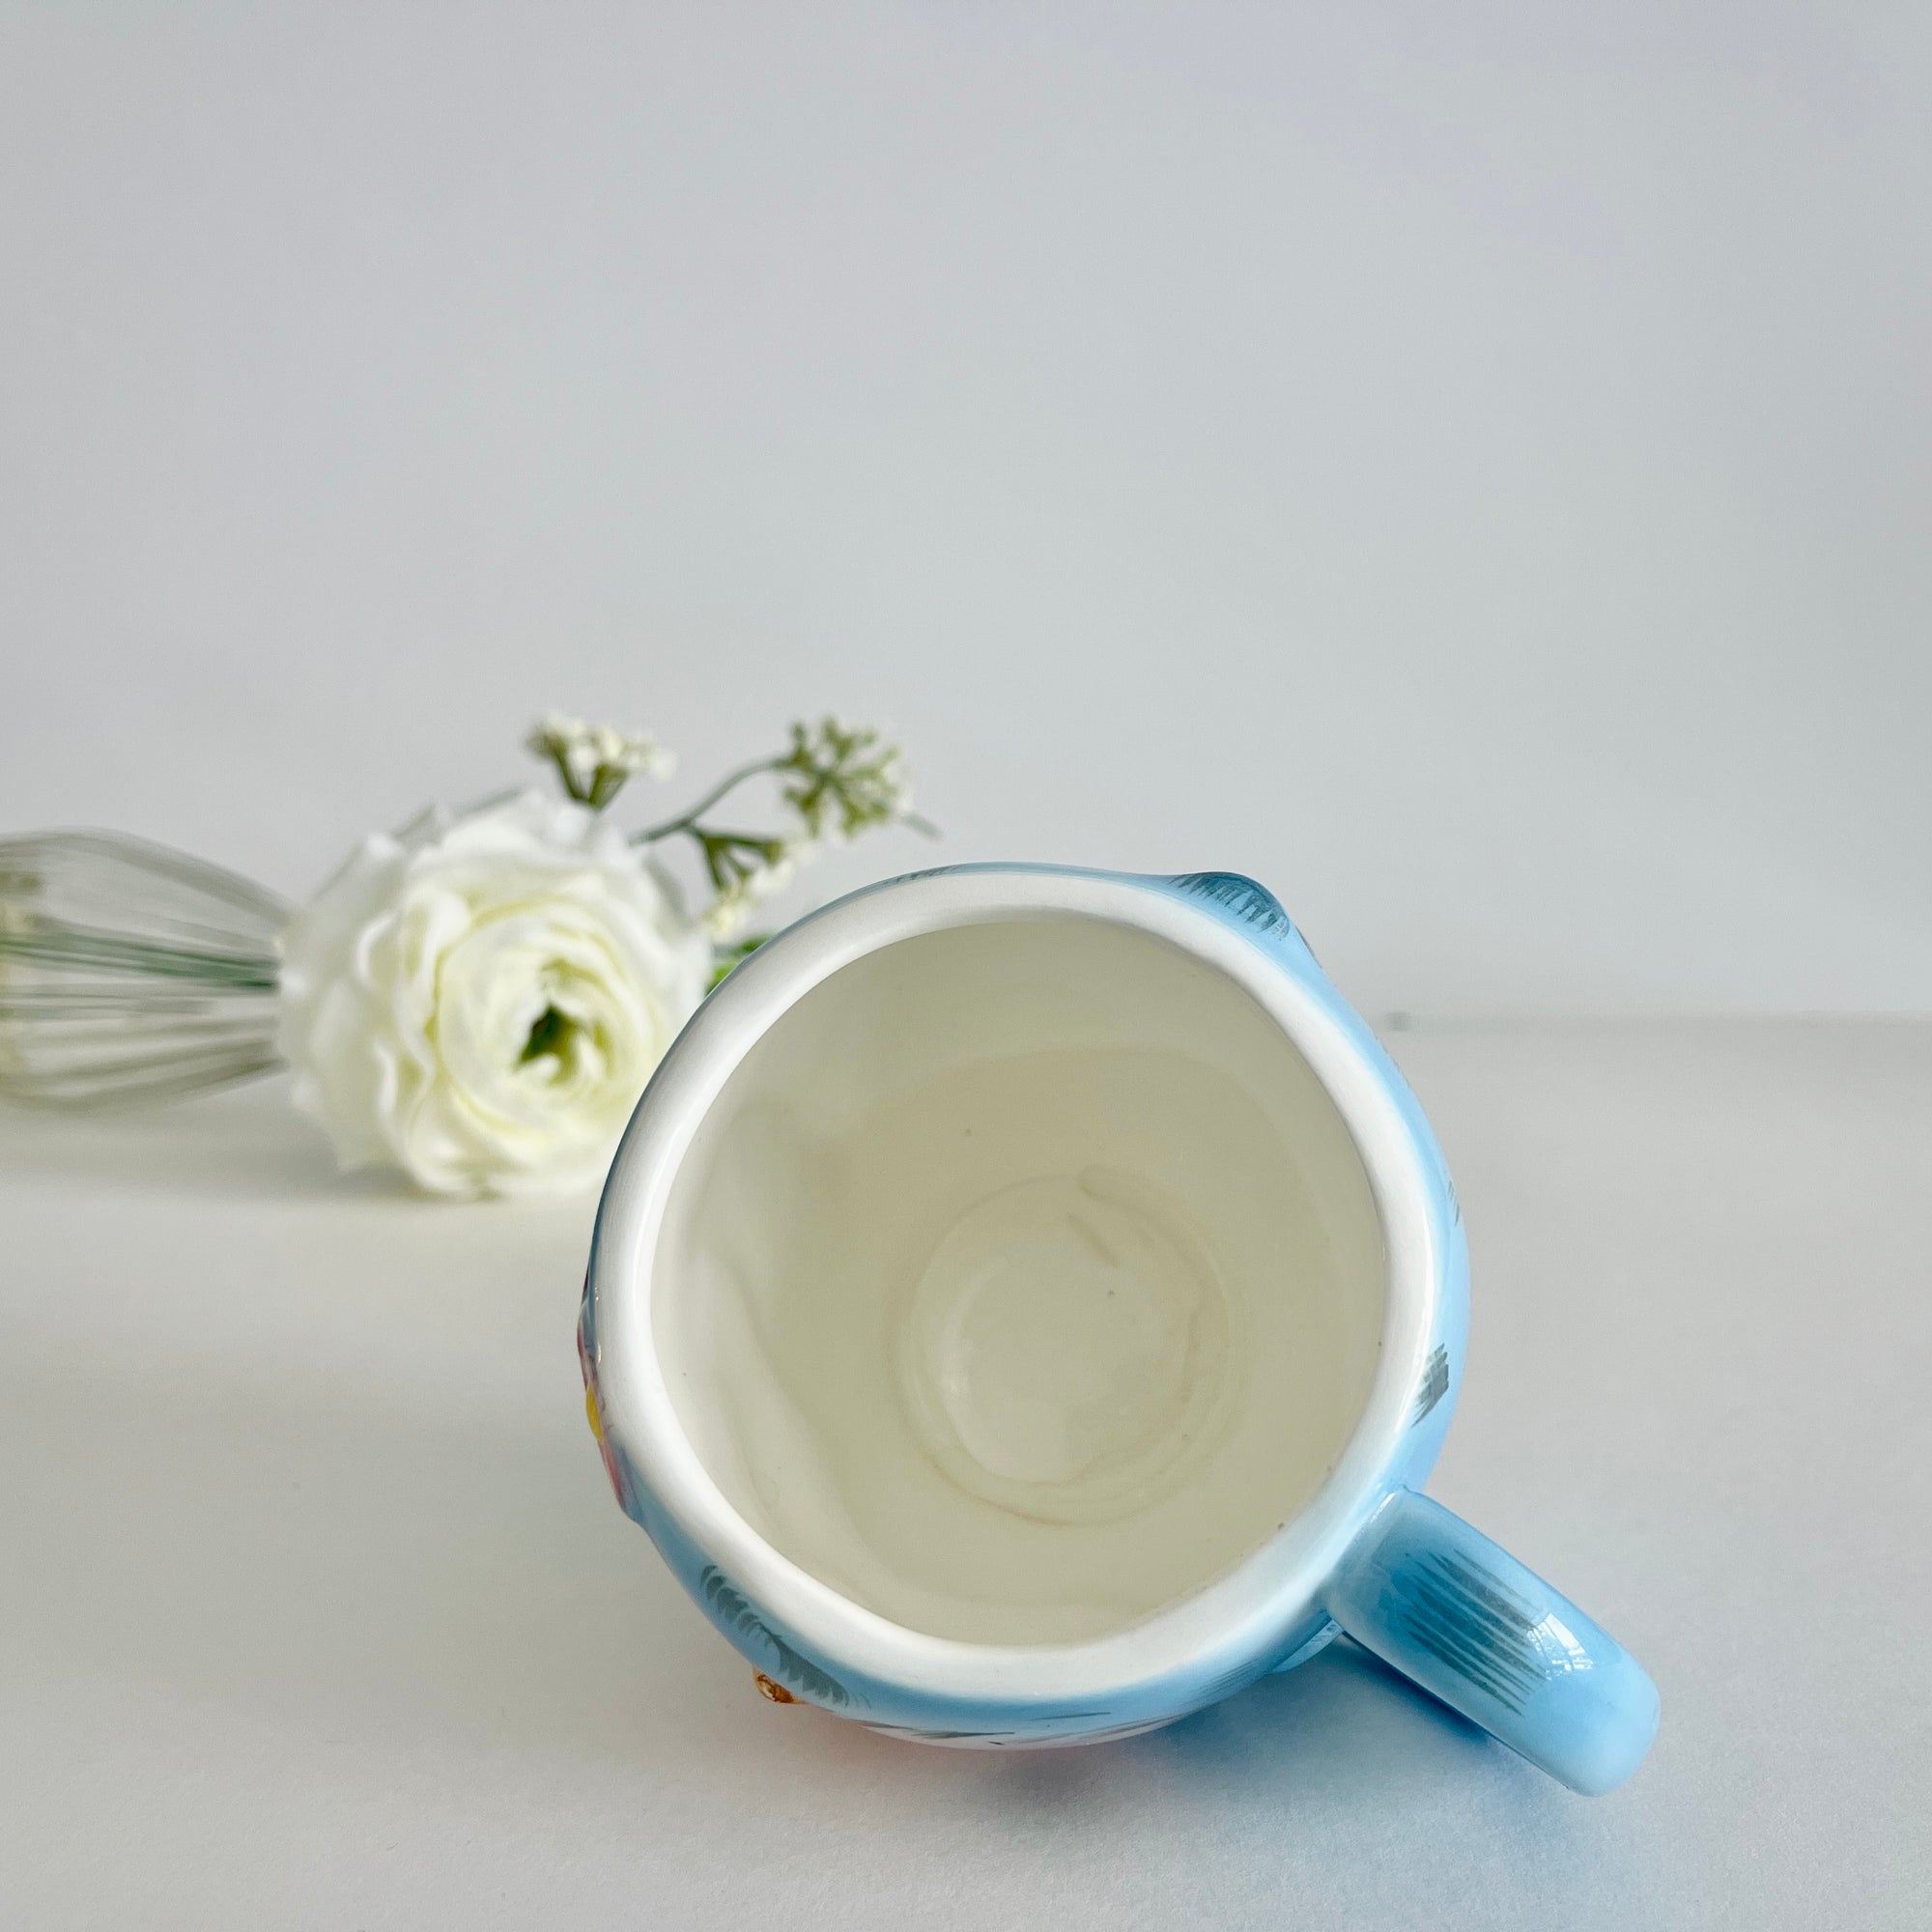 Lefton ESD Teacup and Saucer